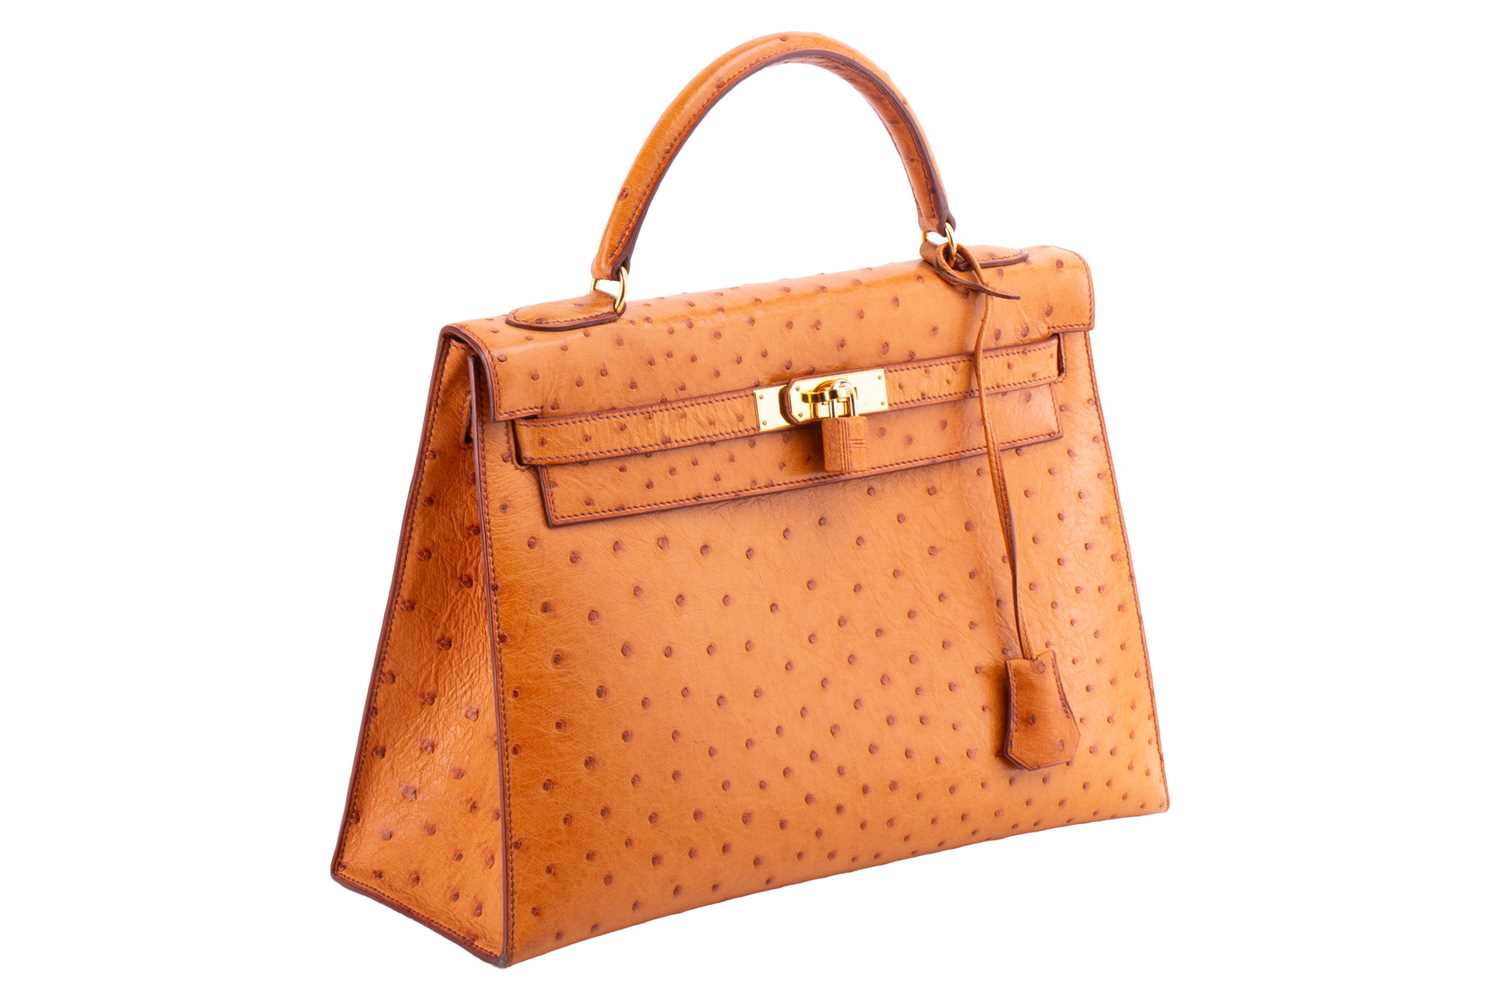 Hermès - a Kelly Sellier 32 in gold ostrich leather, 1999, tapered structured body with gold-tone ha